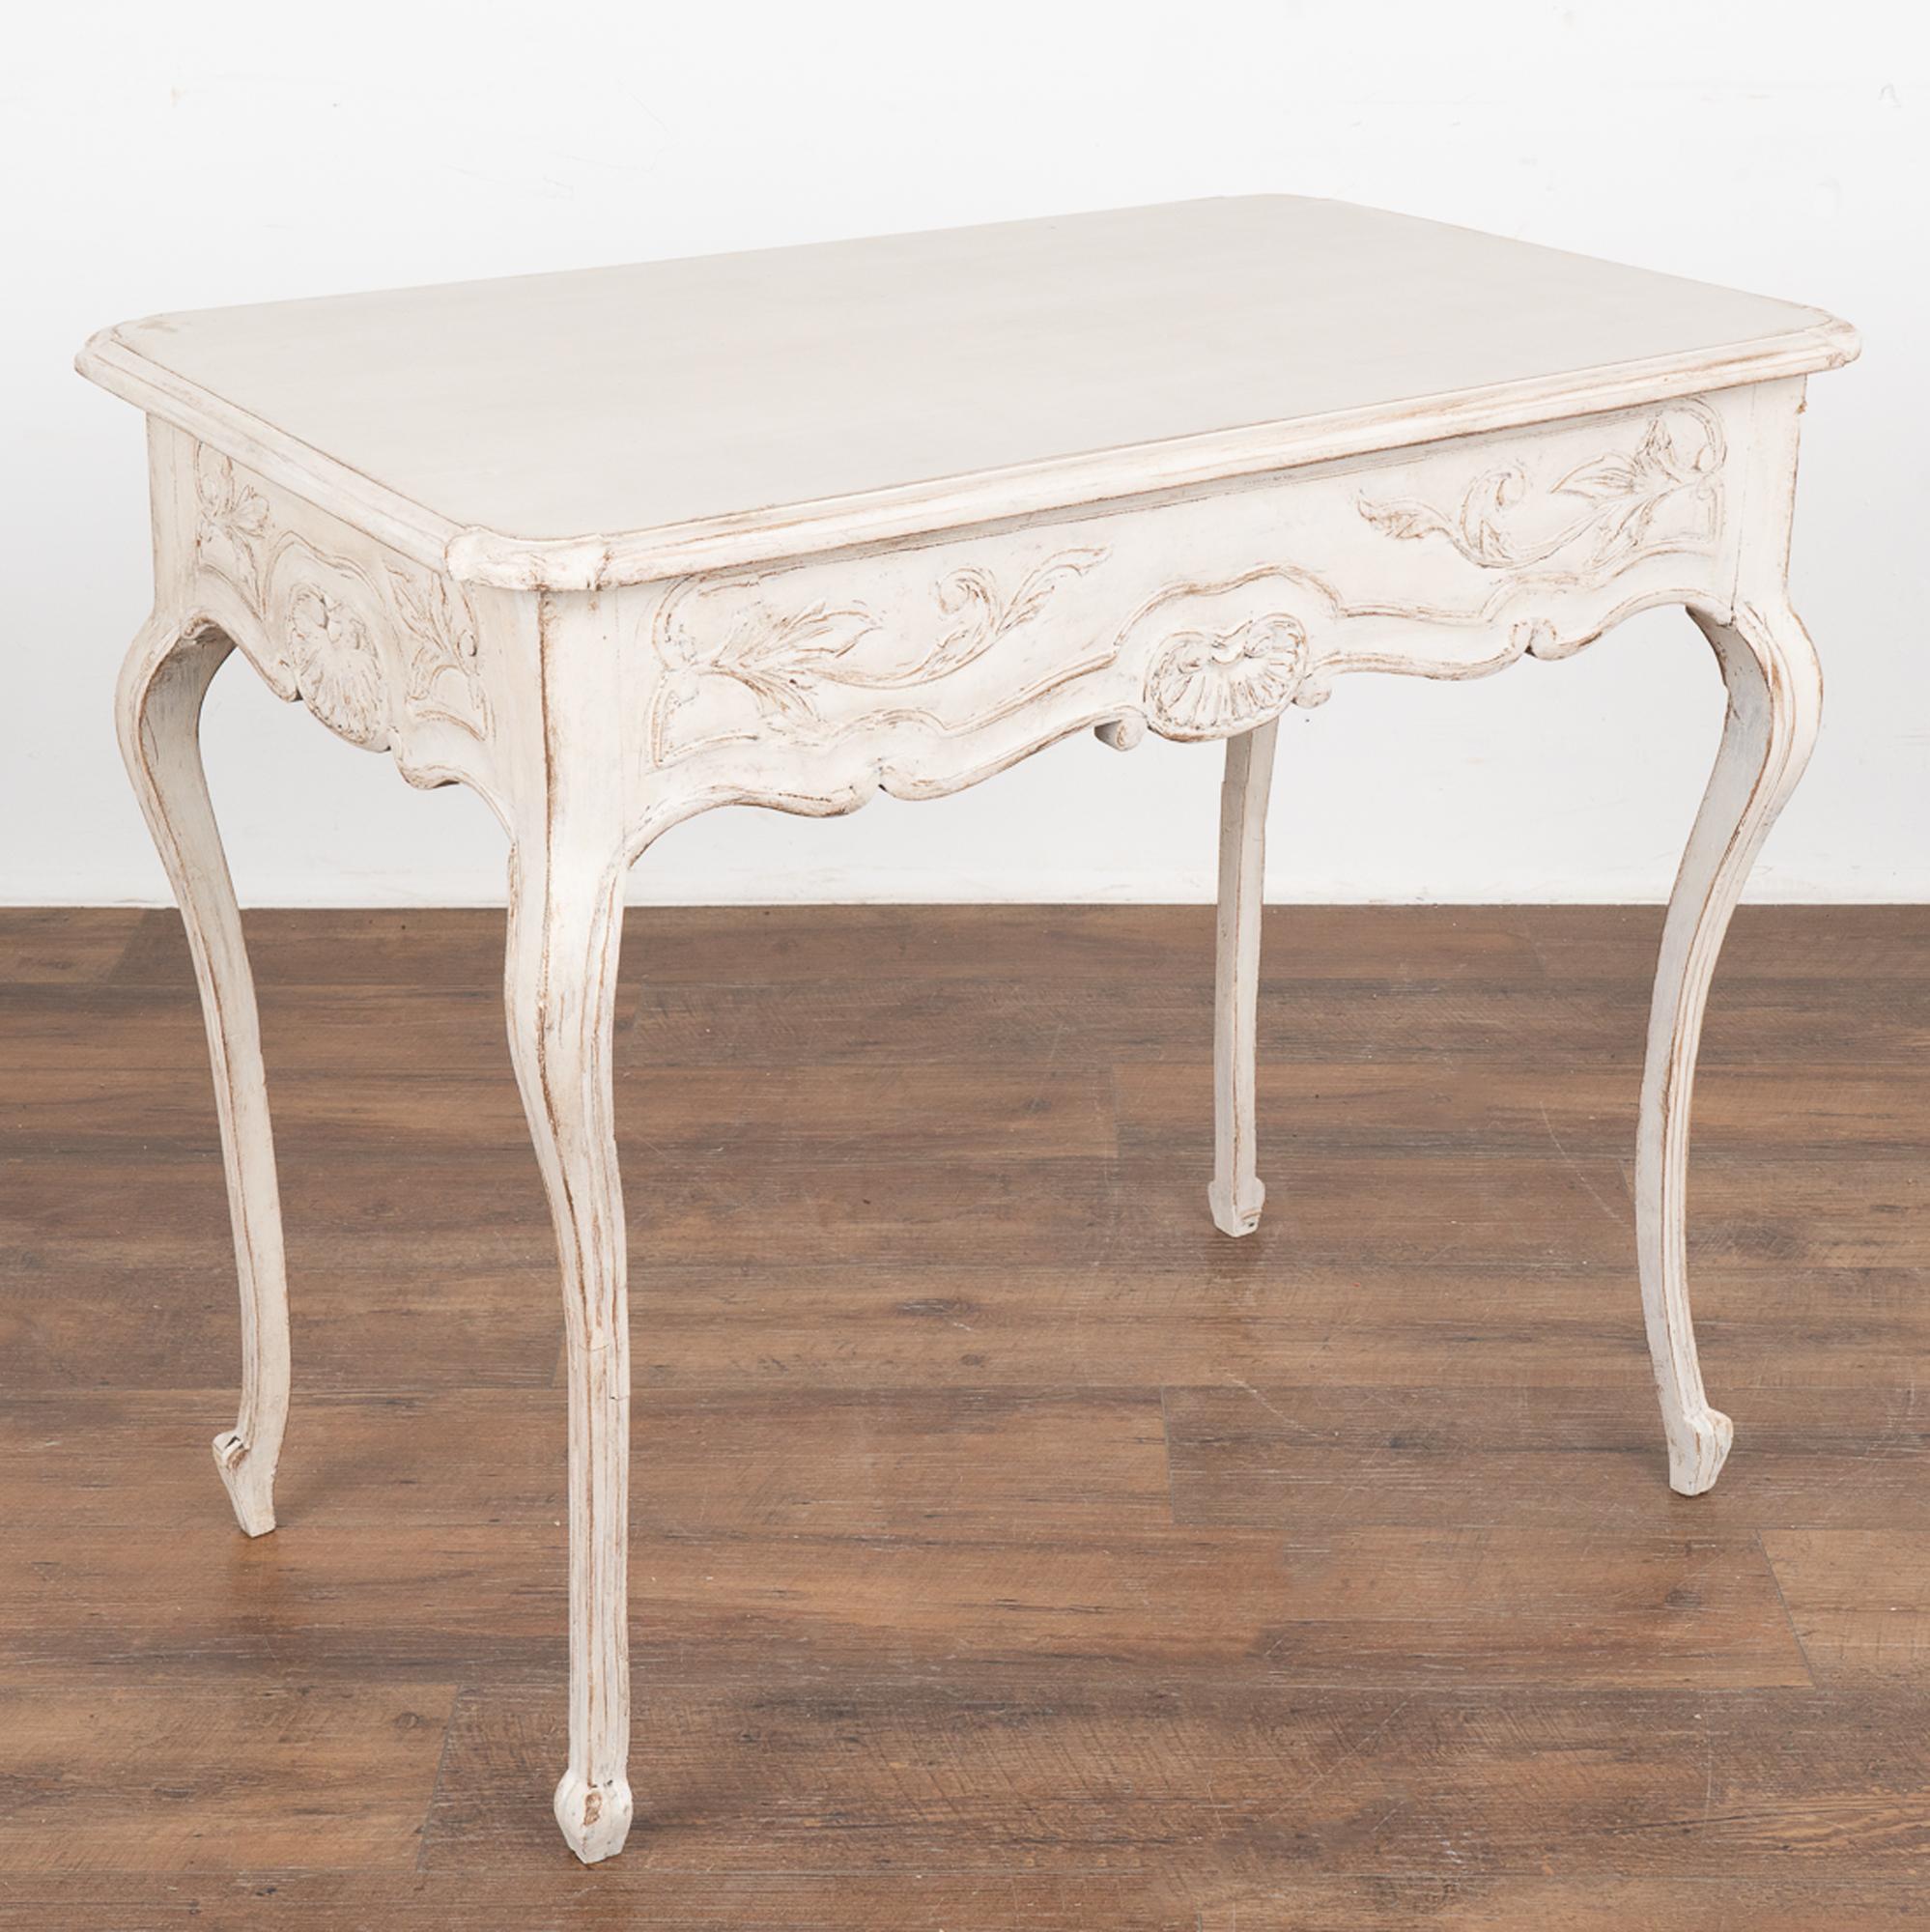 Gustavian White Painted Side Table With Drawer, Sweden circa 1820-40 For Sale 7